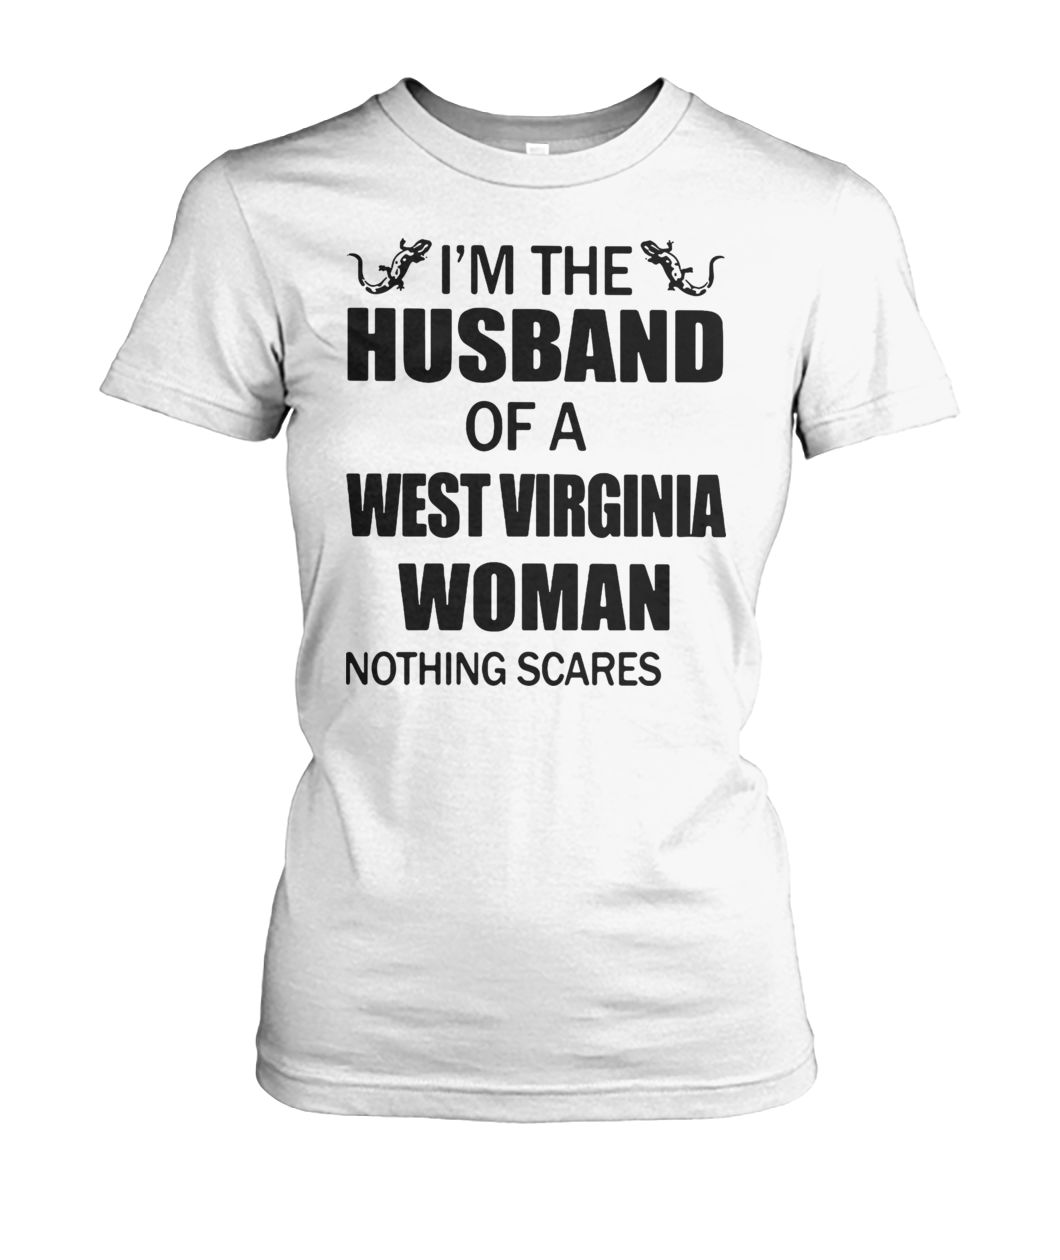 I'm the husband of a west virginia woman nothing scares me women's crew tee